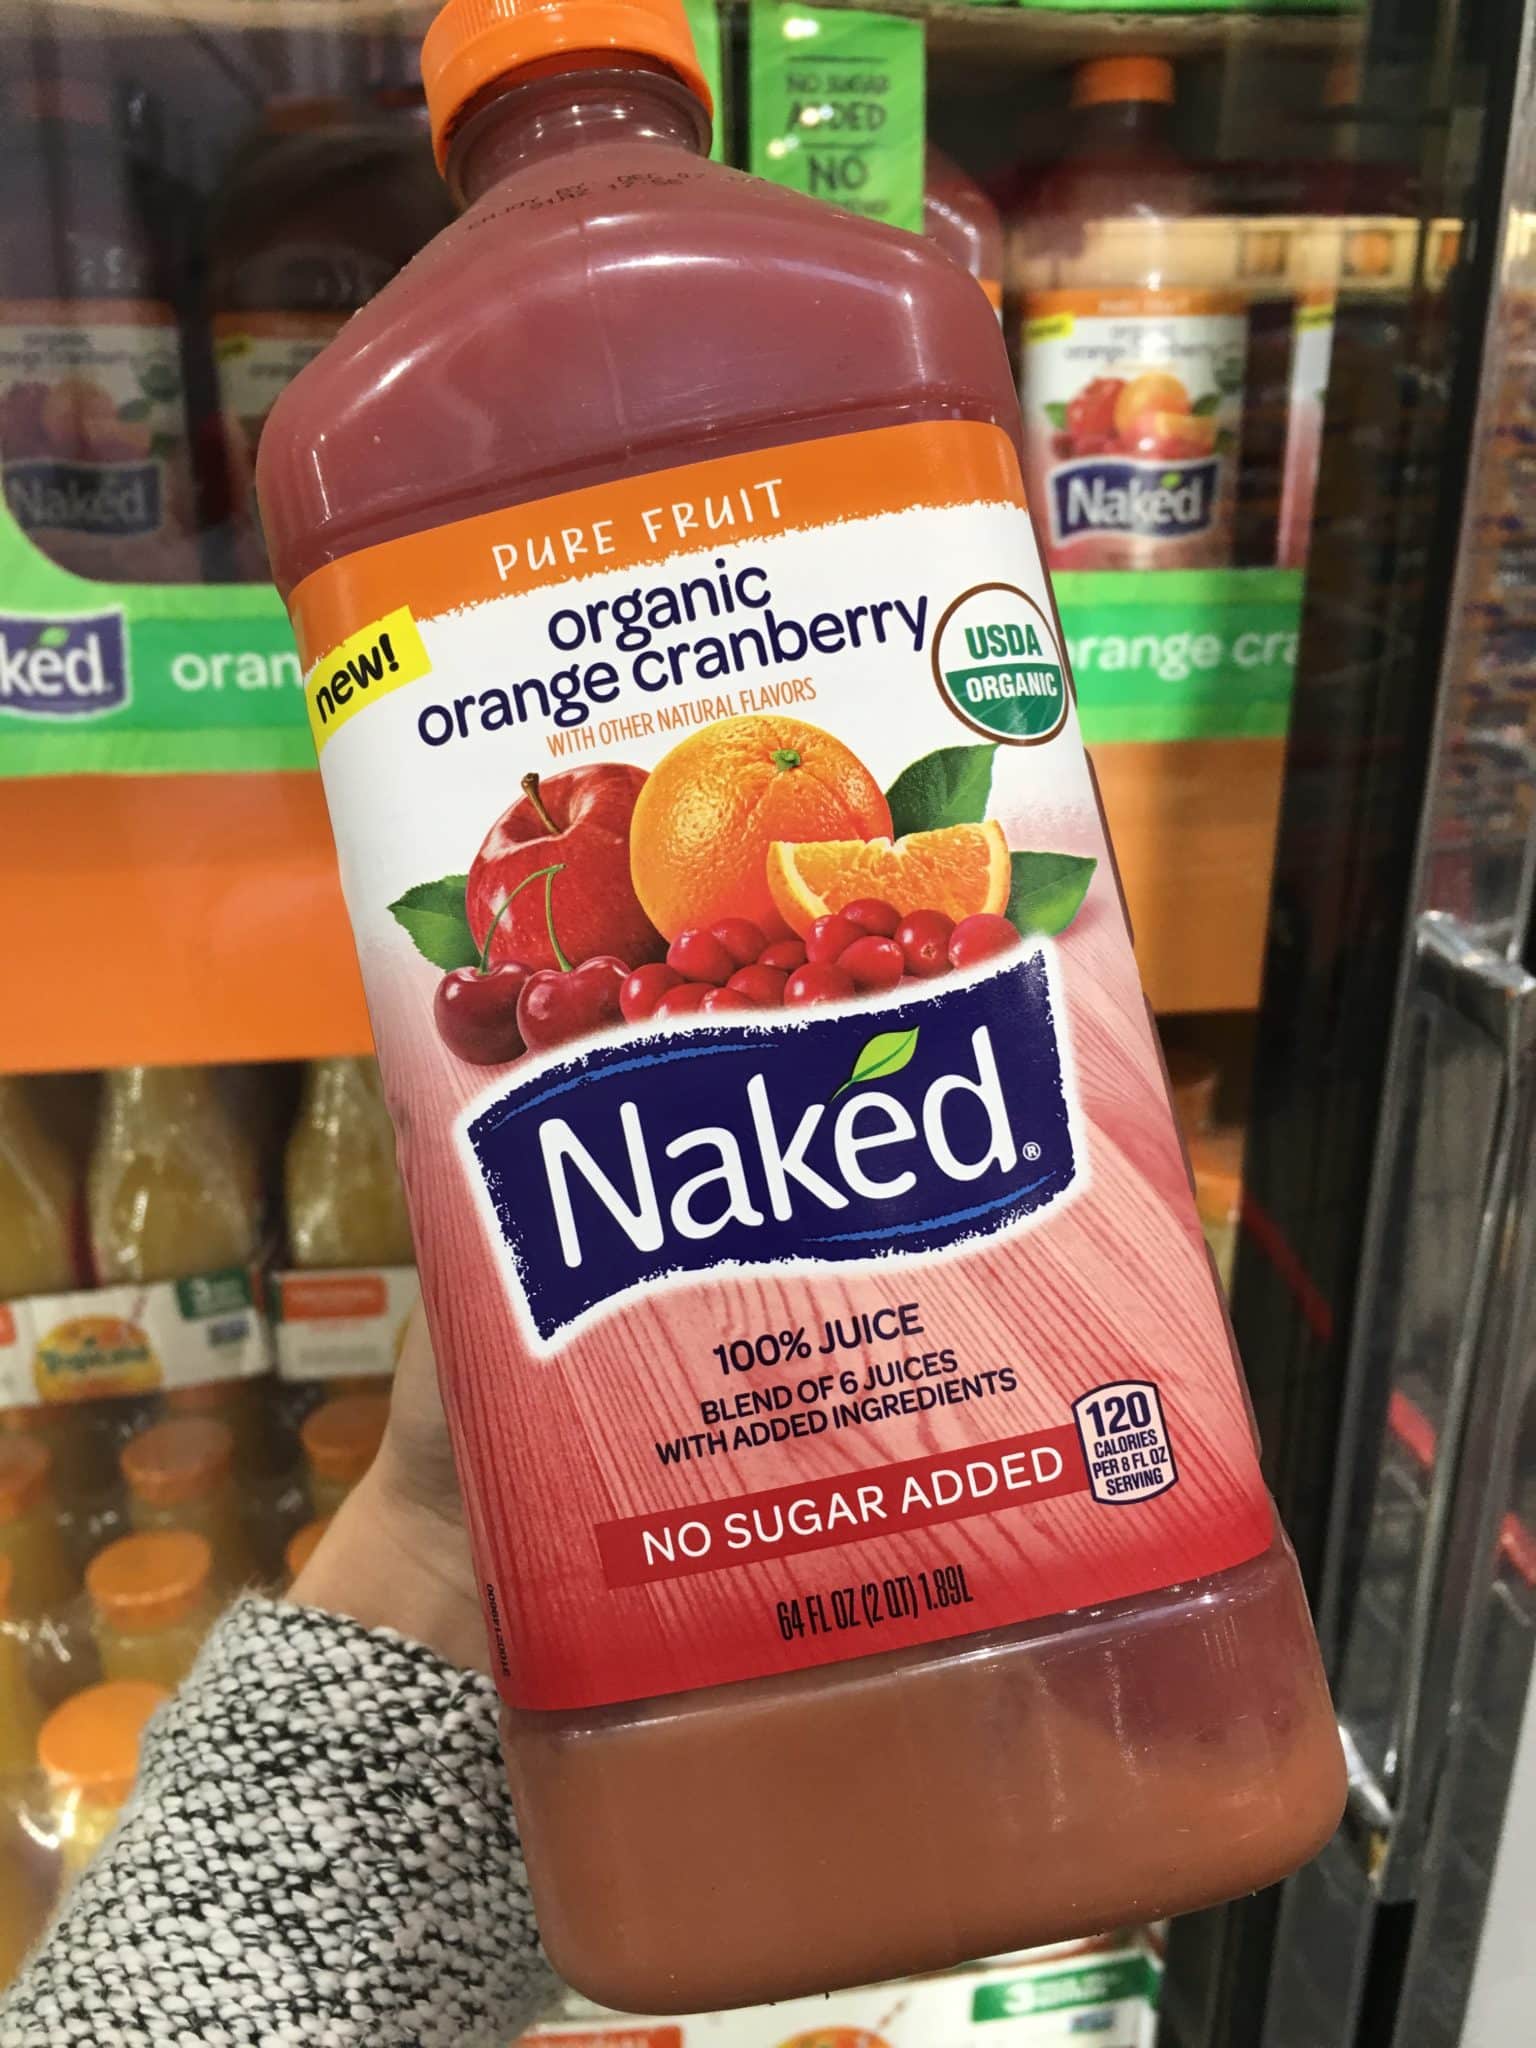 Organic naked juice from Costco